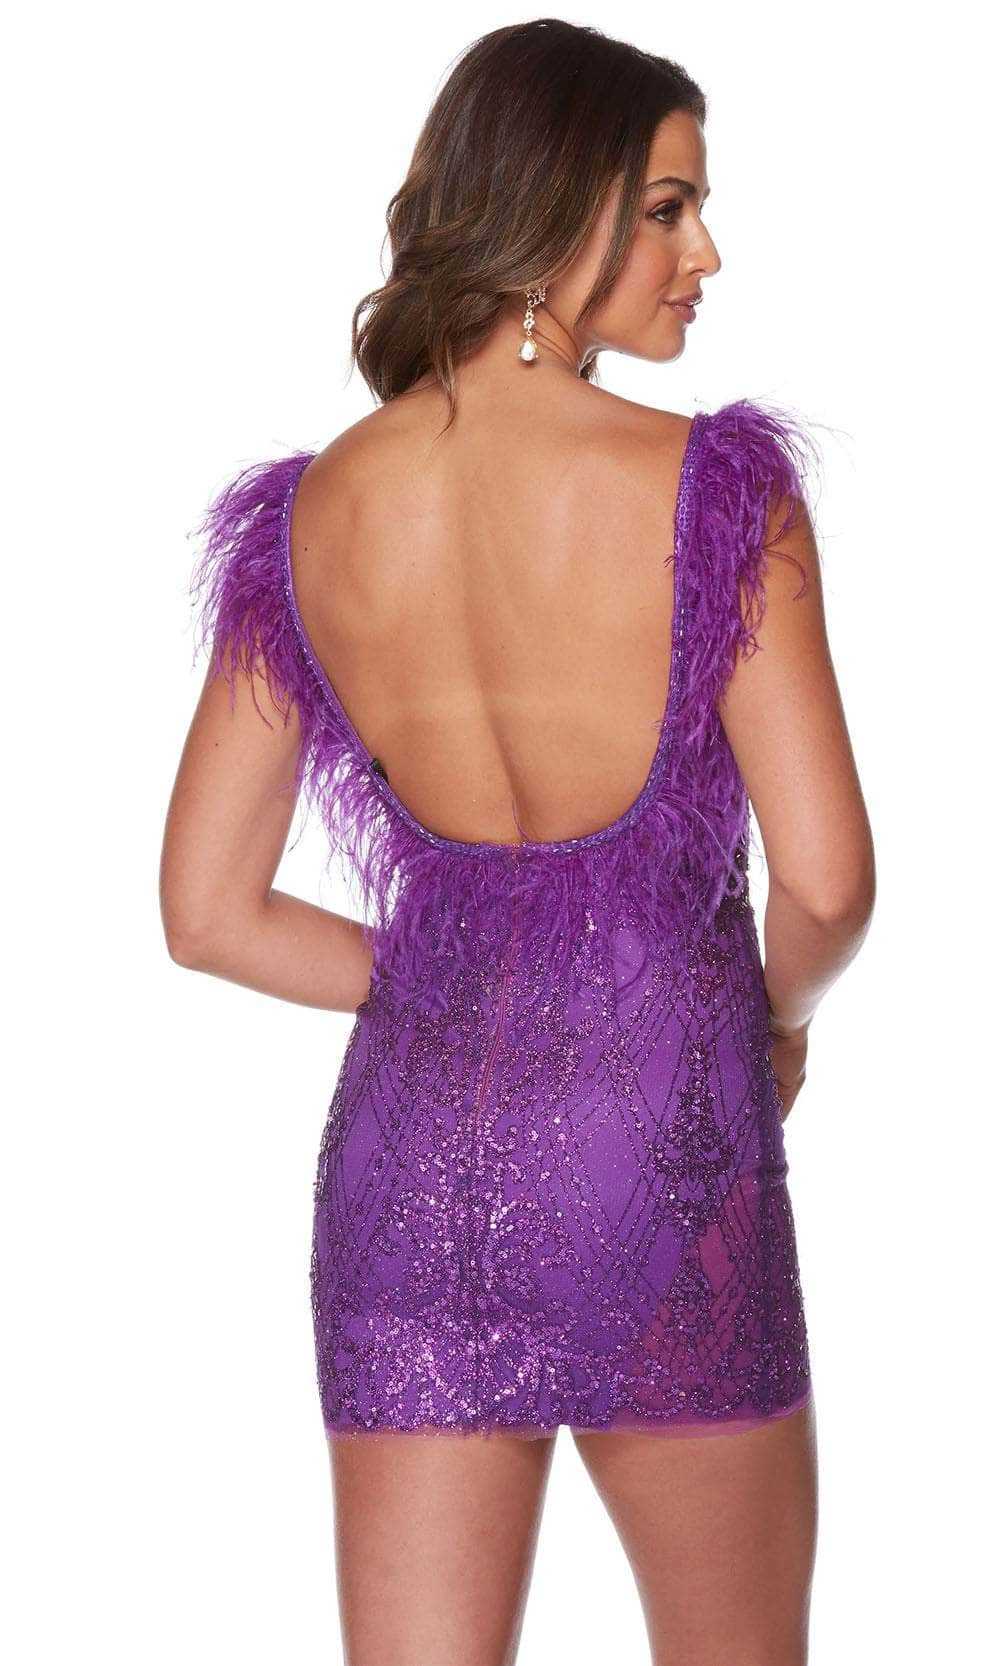 Alyce Paris, Alyce Paris 4669 - Feathered Plunging V-Neck Cocktail Dress